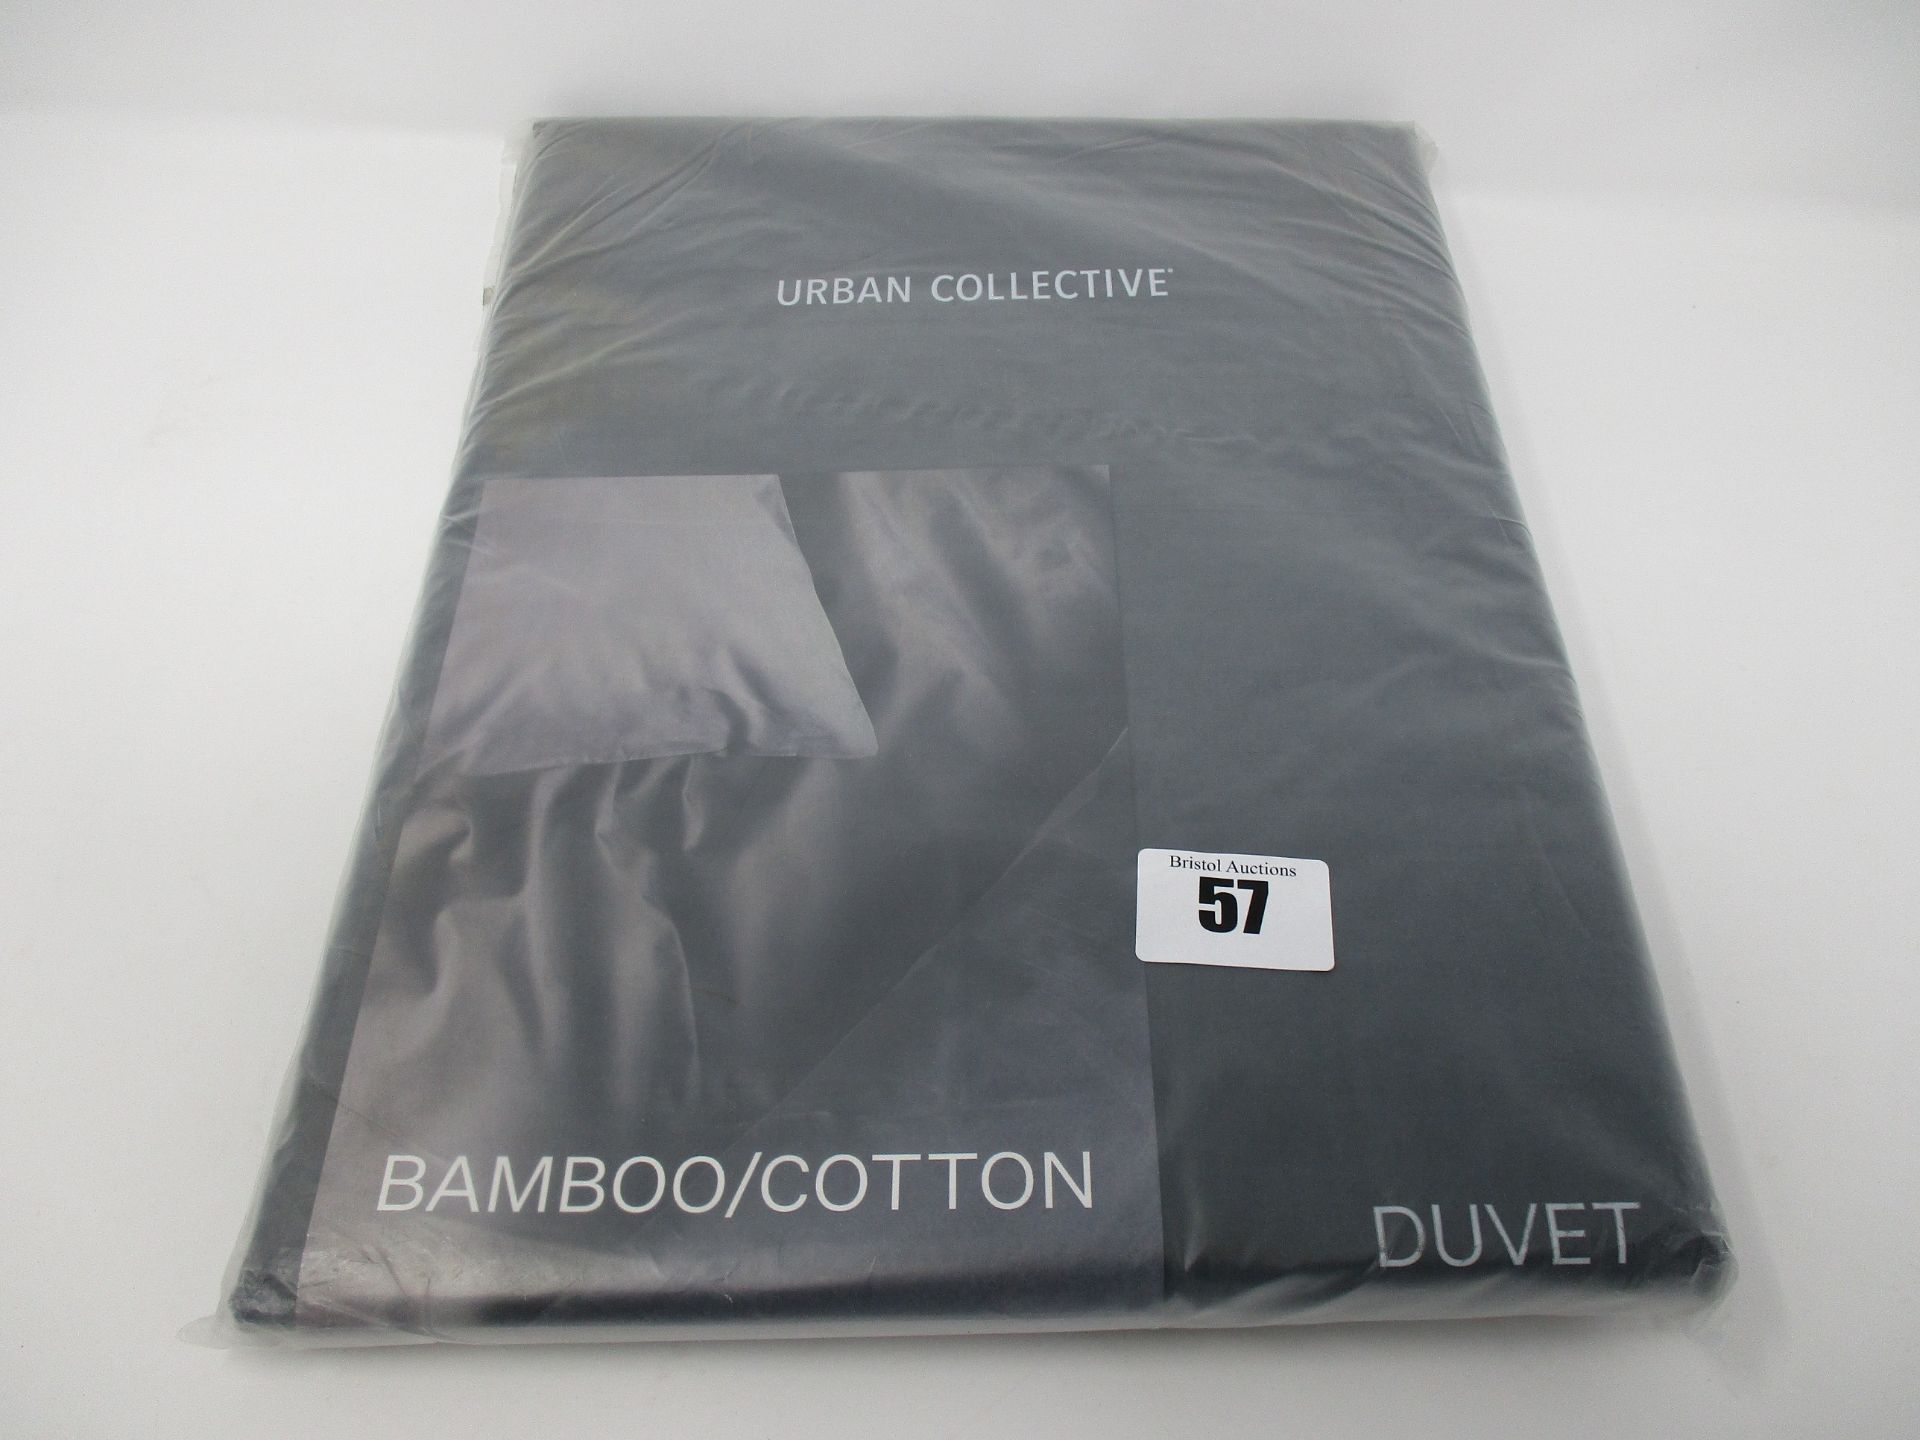 One as new Urban Collective bamboo/cotton grey duvet cover size 200 x 200 cm (10070101).